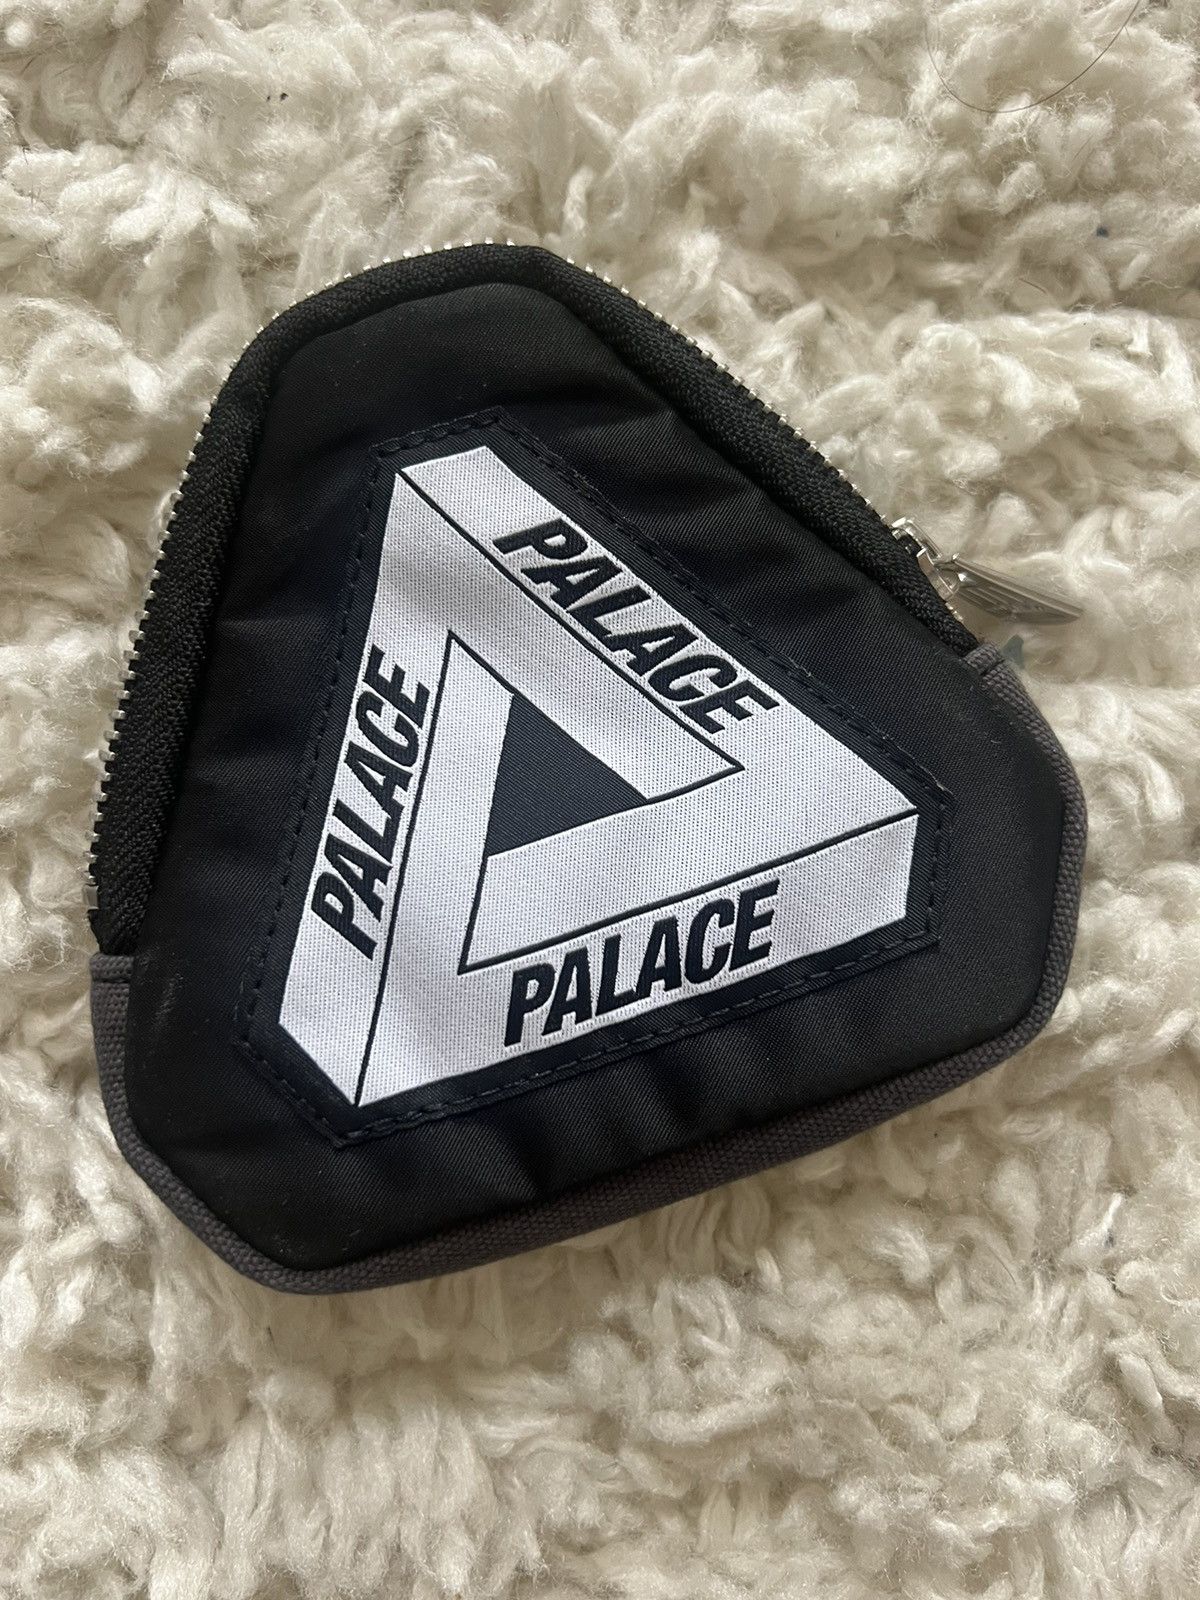 Palace Palace X Porter Zip Coin Wallet | Grailed